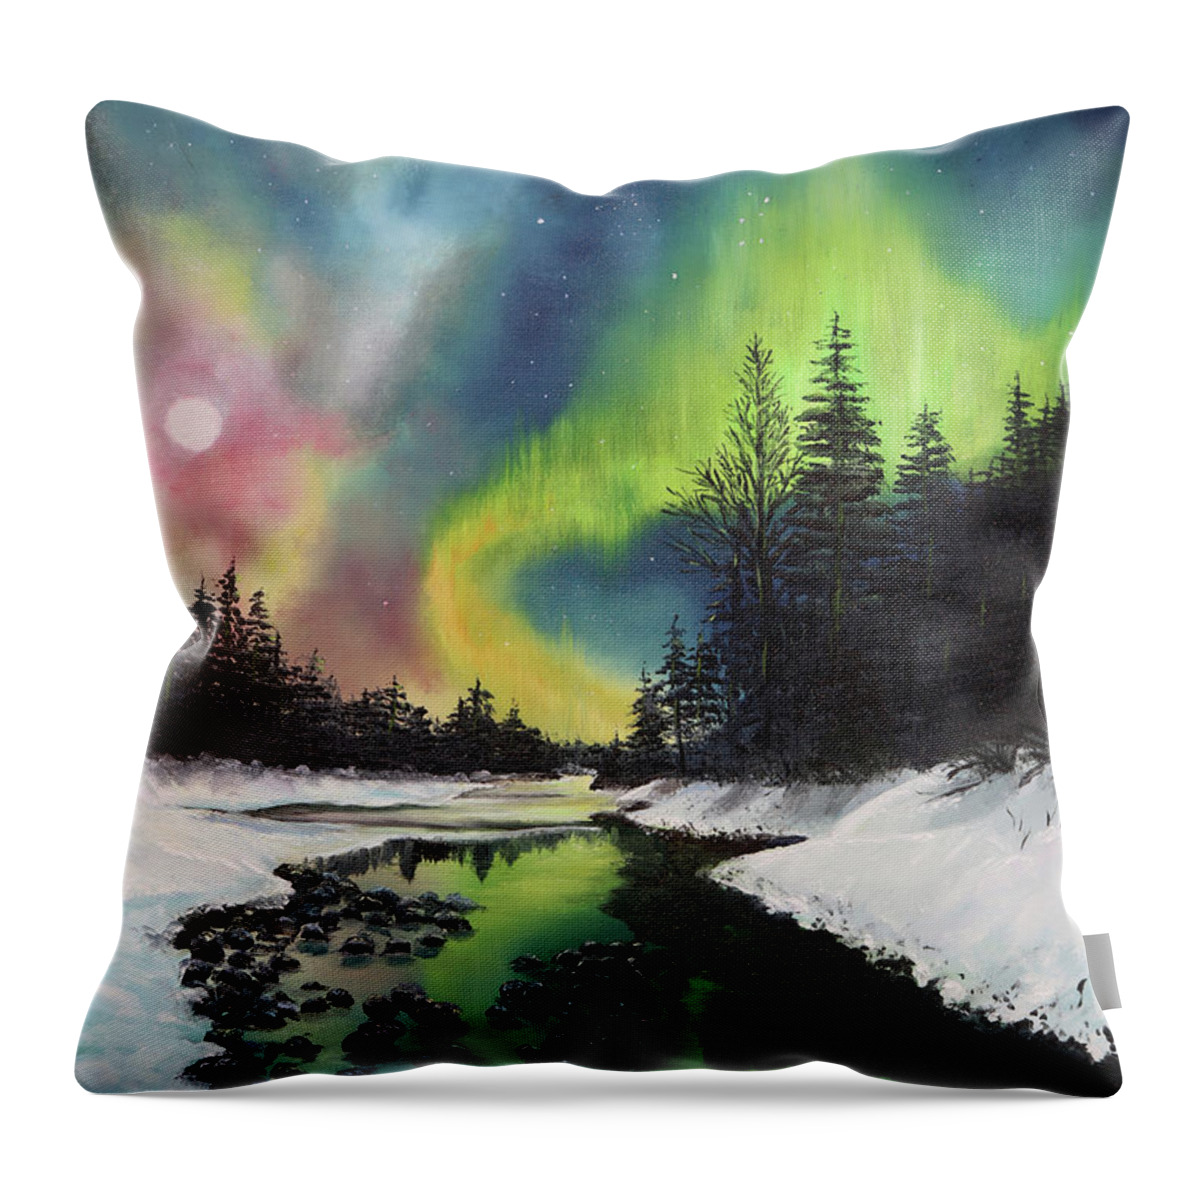 Landscape Throw Pillow featuring the painting Celestial Veils by Stephen Krieger